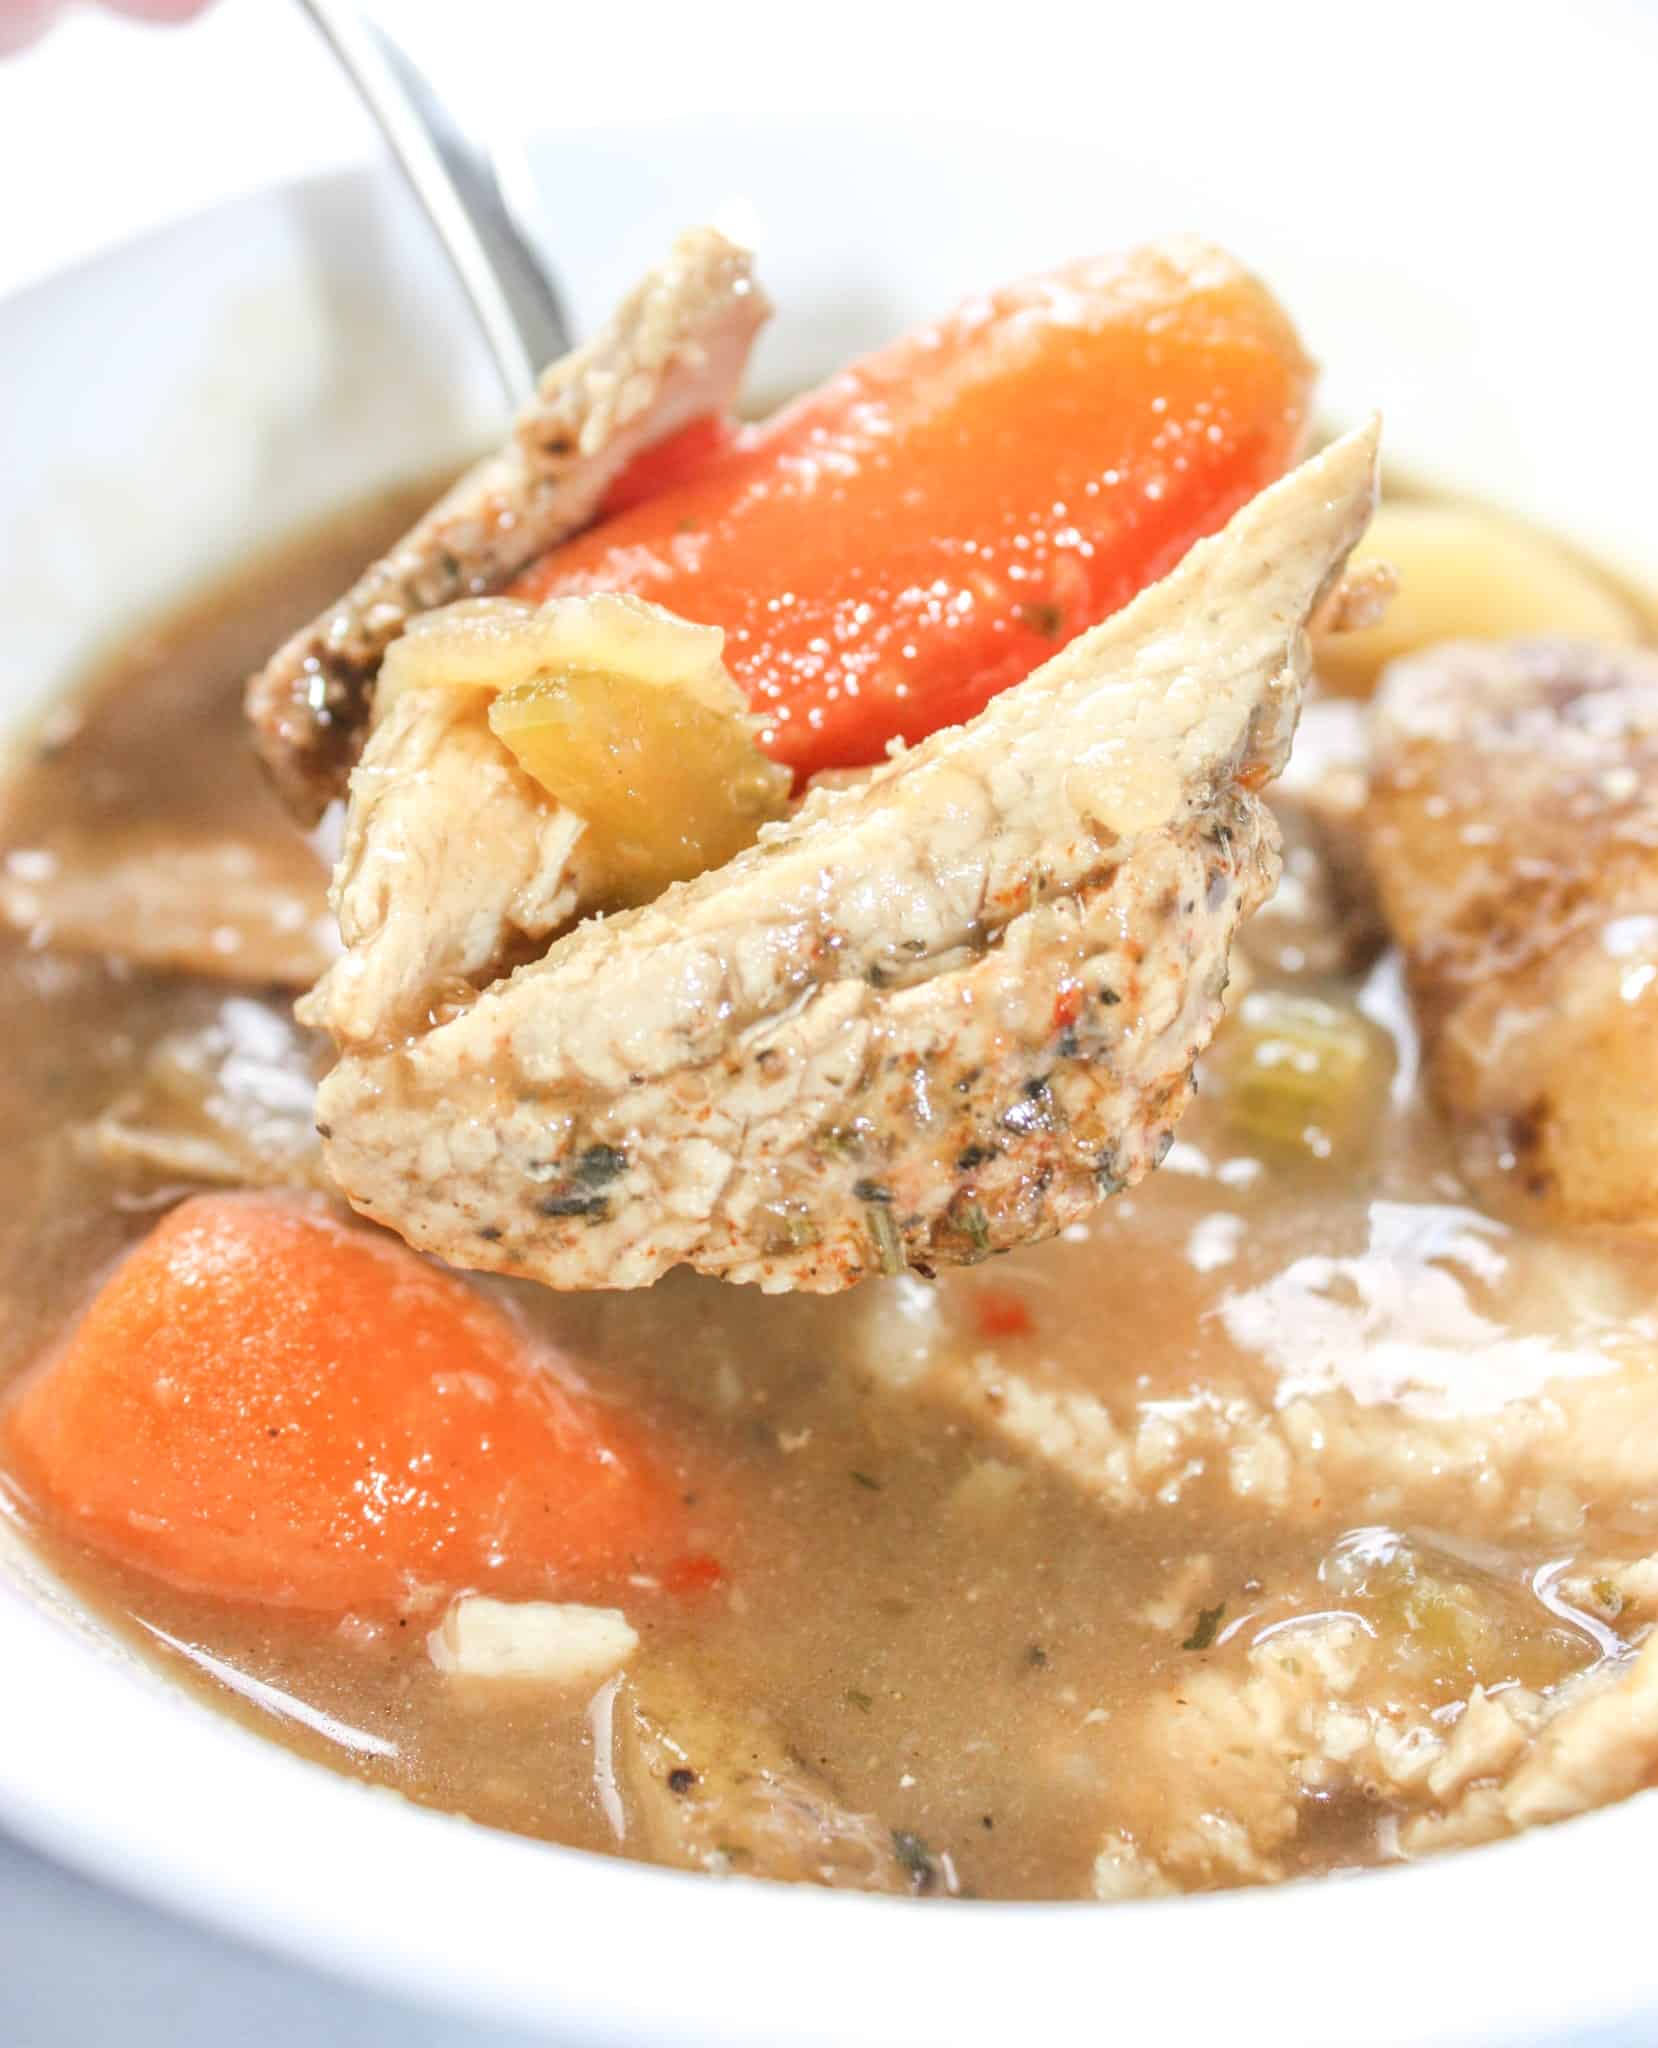 Instant Pot Wild Turkey Stew is a hearty gluten free stew recipe loaded with turkey and vegetables in a thick gravy.